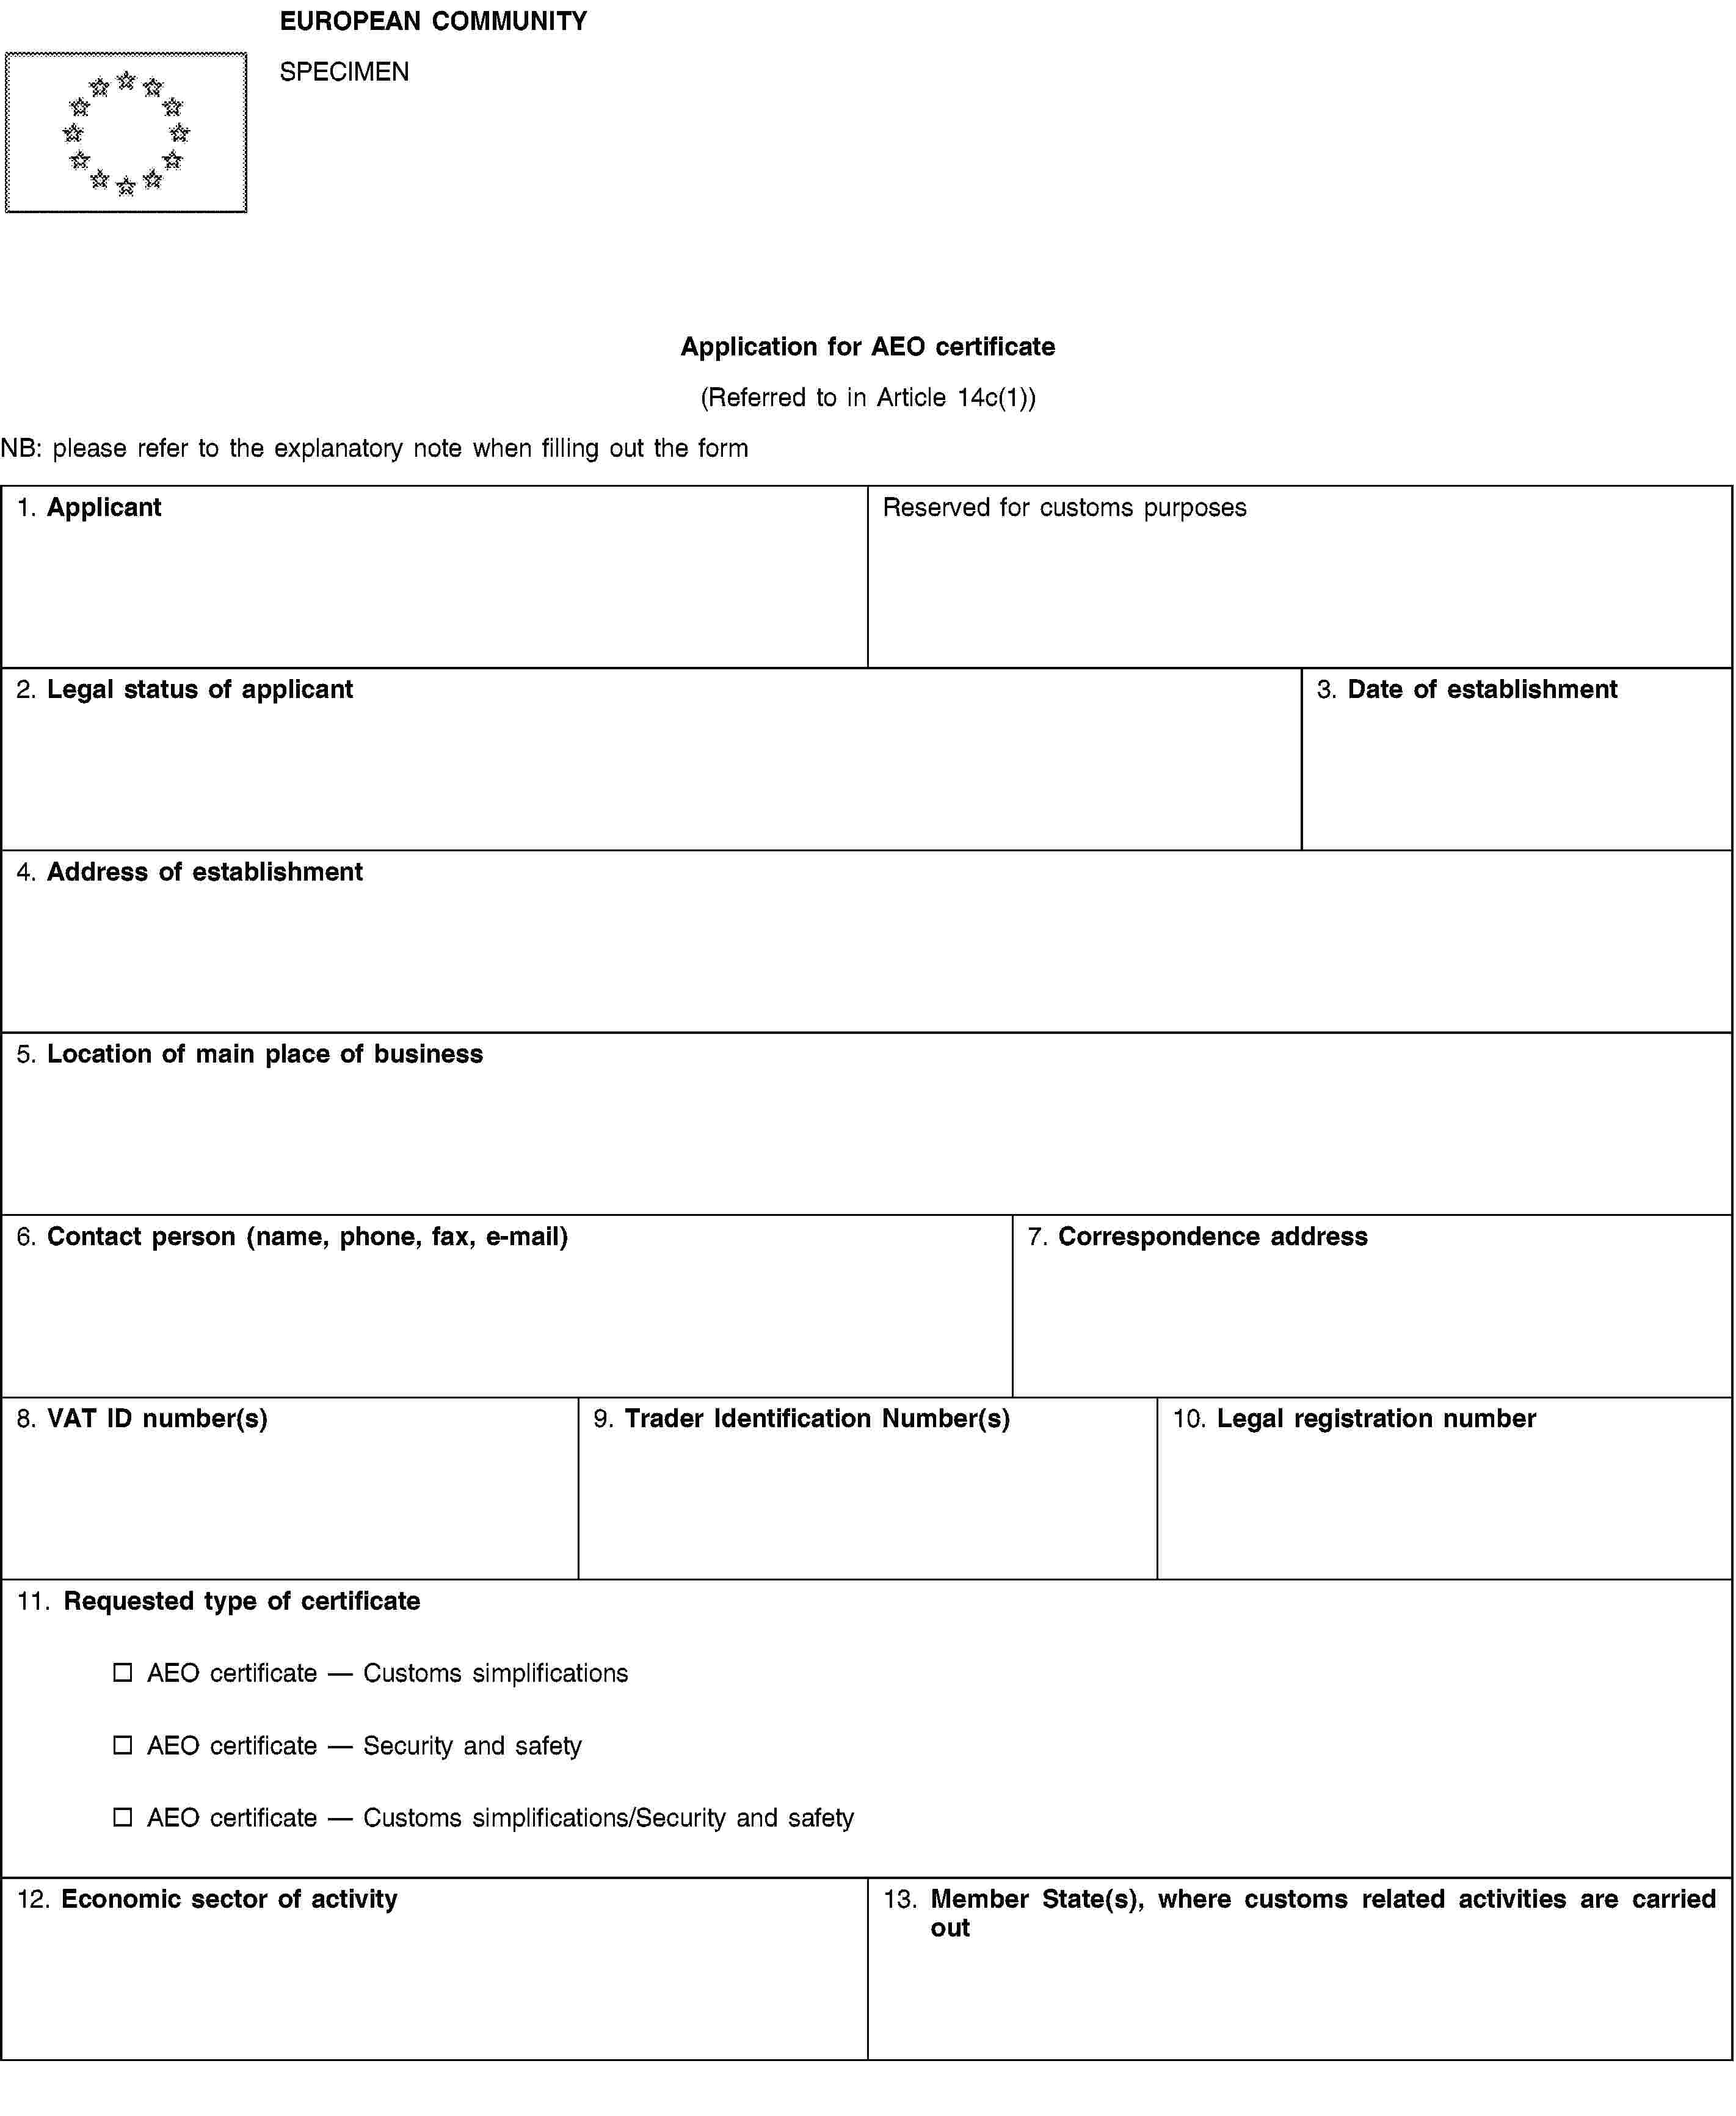 EUROPEAN COMMUNITYSPECIMENApplication for AEO certificate(Referred to in Article 14c(1))NB: please refer to the explanatory note when filling out the form1. ApplicantReserved for customs purposes2. Legal status of applicant3. Date of establishment4. Address of establishment5. Location of main place of business6. Contact person (name, phone, fax, e-mail)7. Correspondence address8. VAT ID number(s)9. Trader Identification Number(s)10. Legal registration number11. Requested type of certificateAEO certificate — Customs simplificationsAEO certificate — Security and safetyAEO certificate — Customs simplifications/Security and safety12. Economic sector of activity13. Member State(s), where customs related activities are carried out